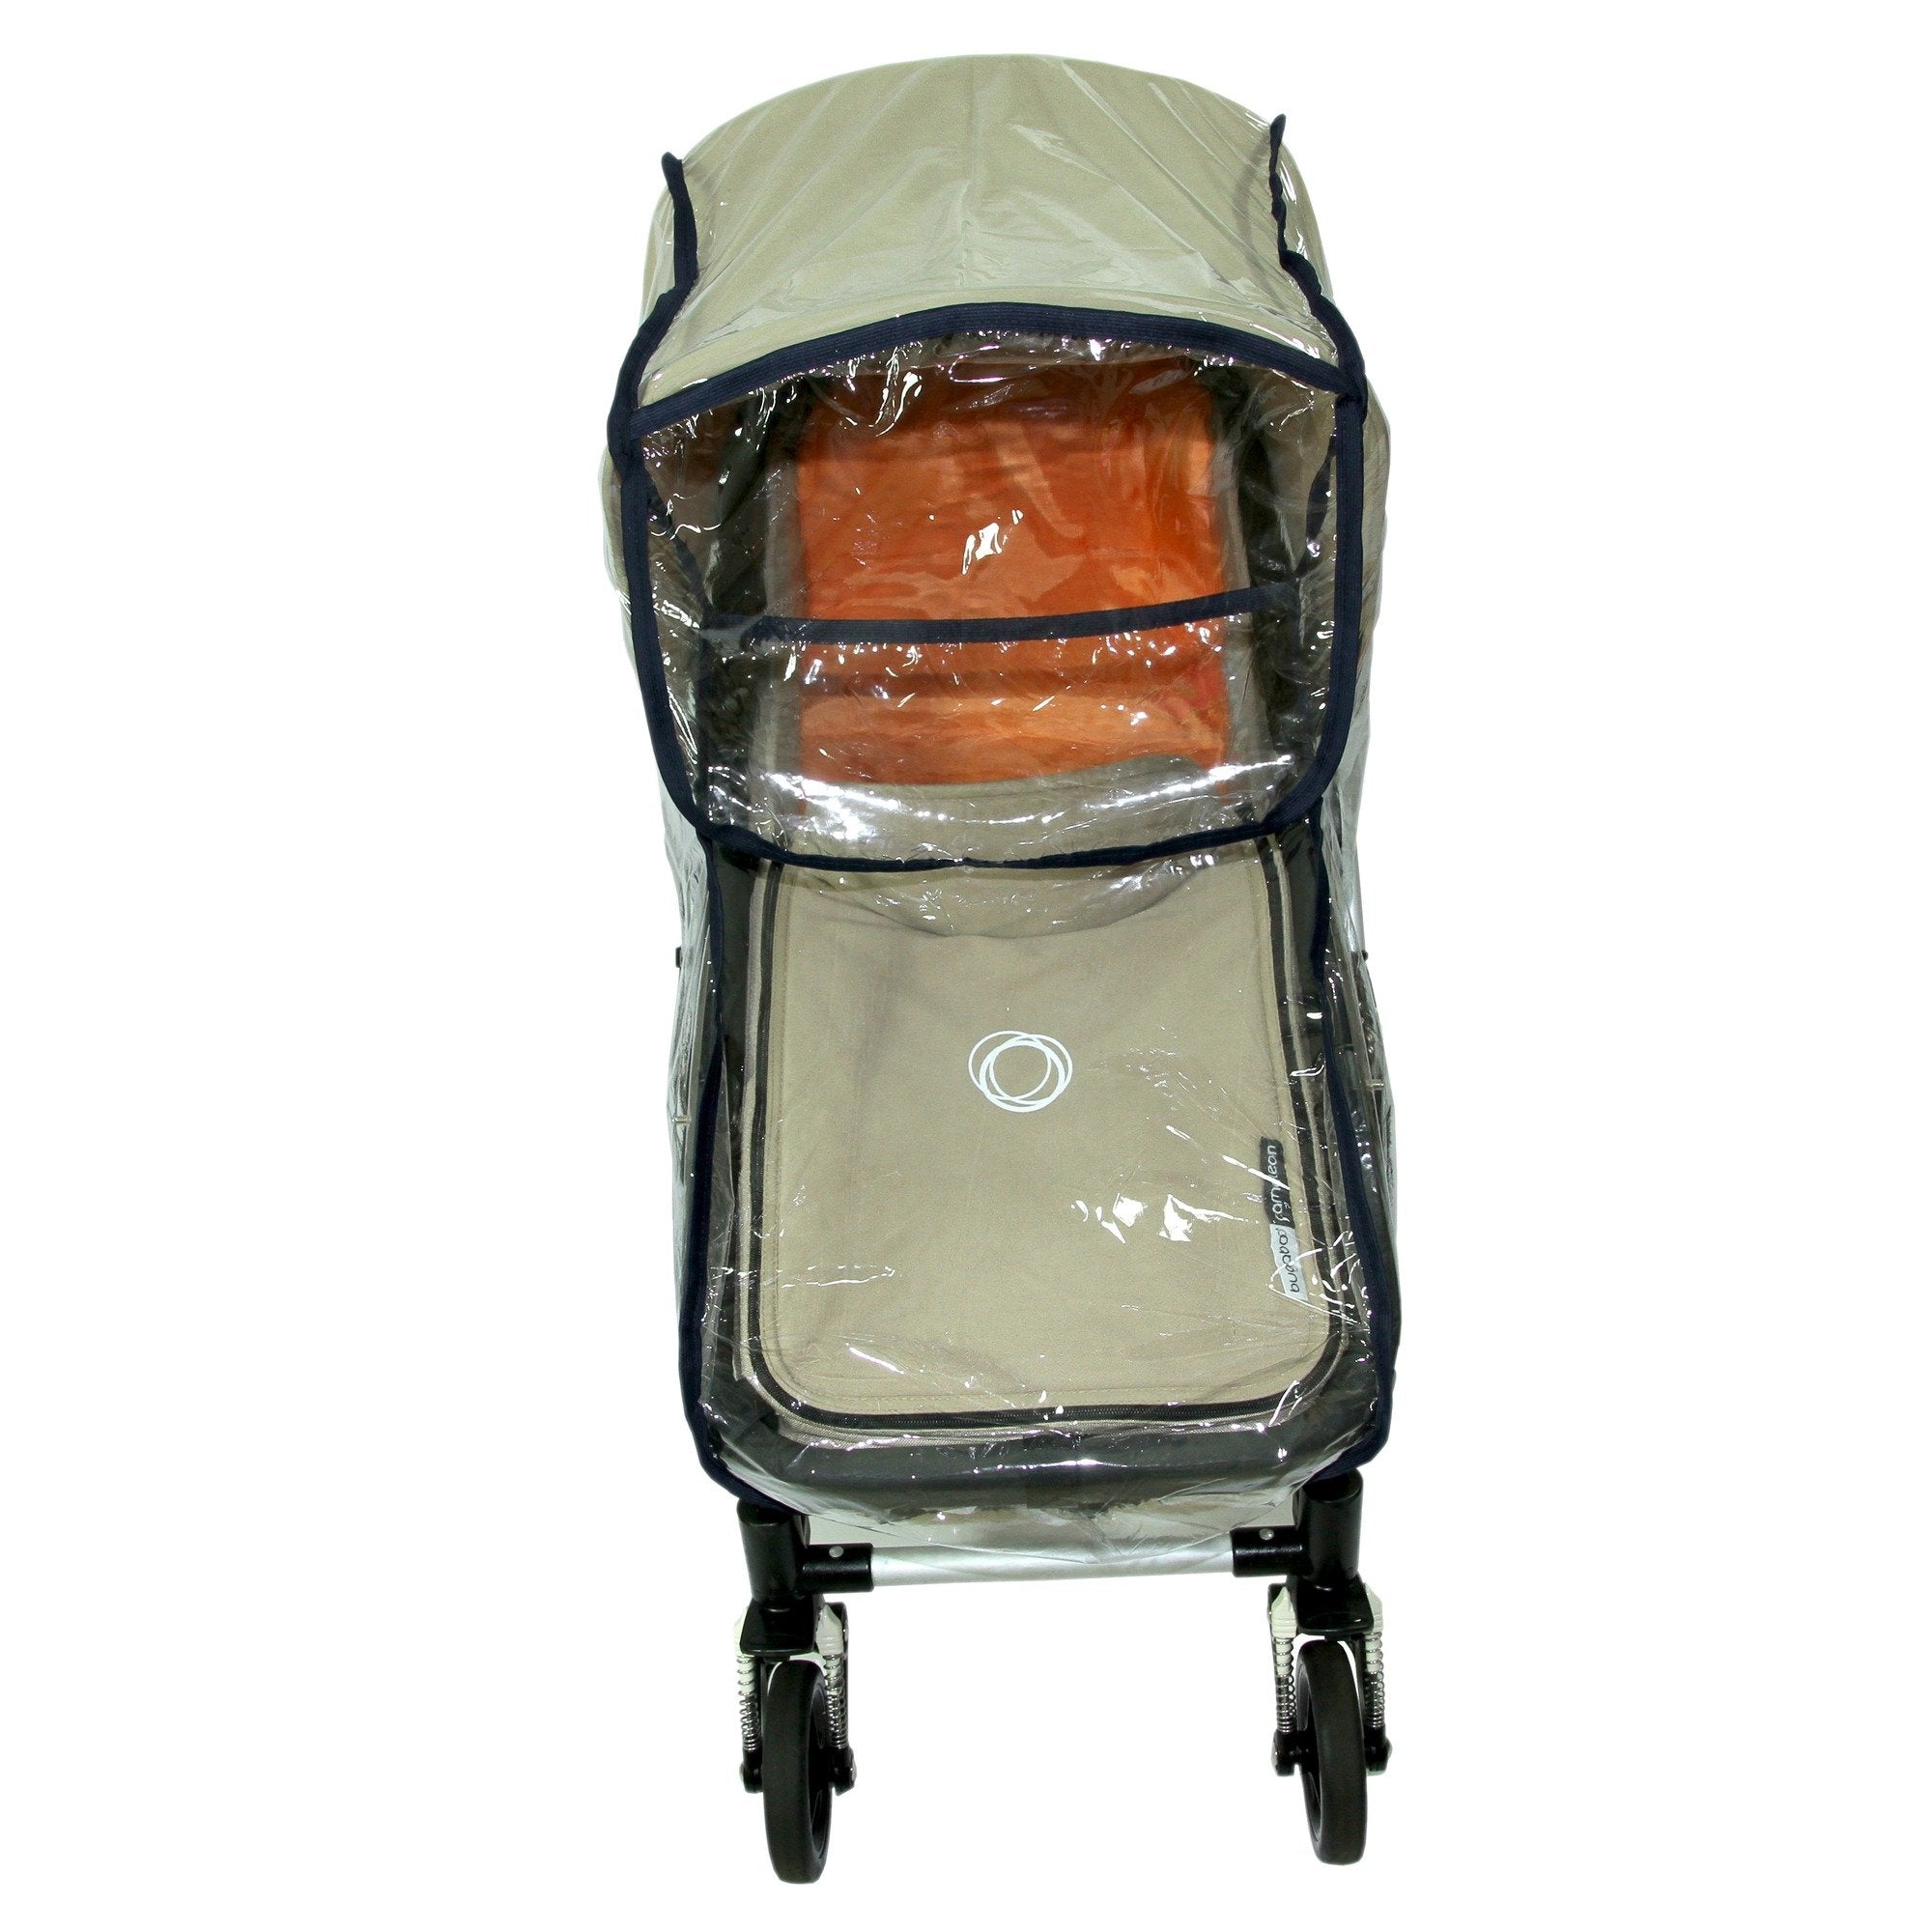 NEW BABY CHILD PRAM CARRY COT BASSINET RAIN COVER fits BUGABOO (black)